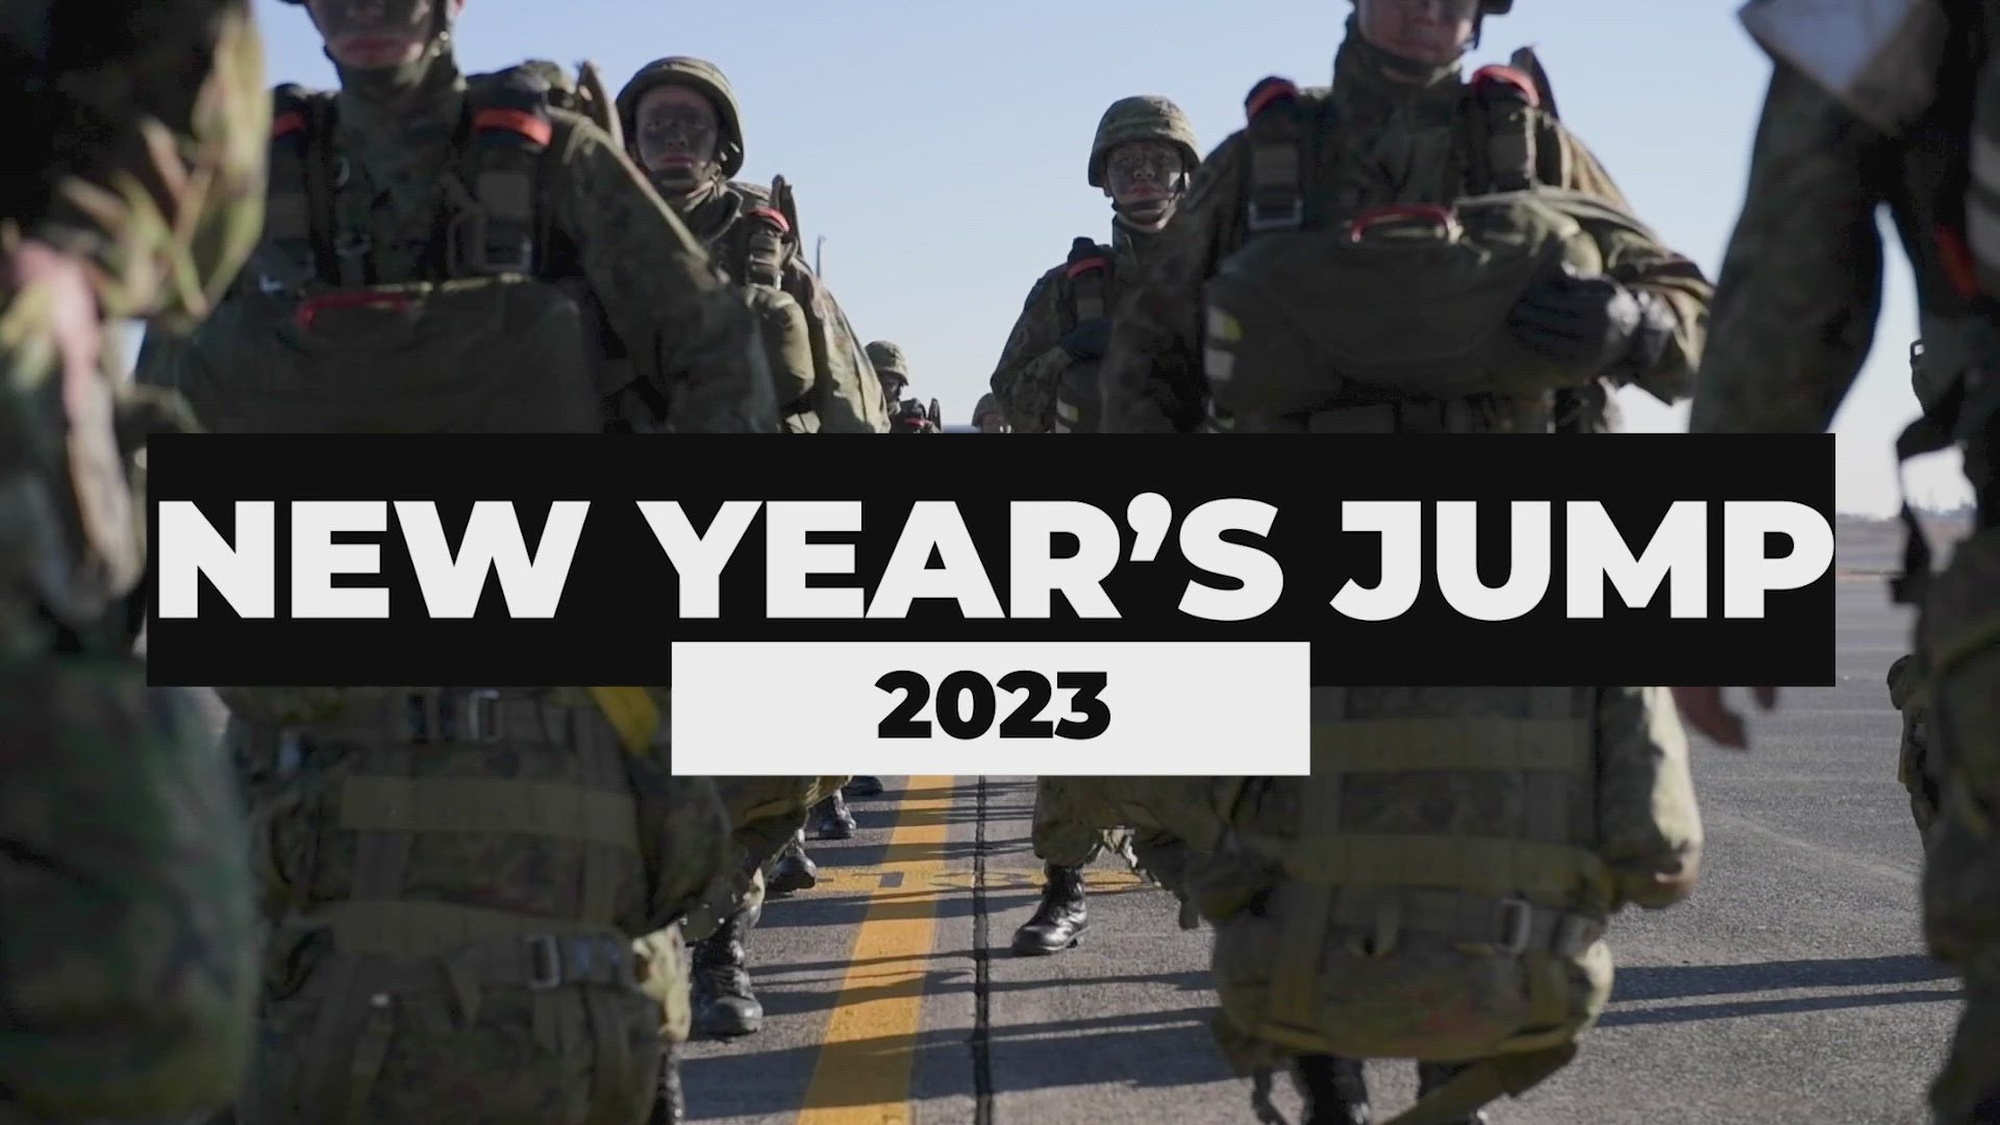 Roughly 400 paratroopers participated in the annual New Year's jump. The New Year’s Jumps kick off a series of bilateral training exercises for Team Yokota, which have long since aimed to increase the combat readiness and friendships between the U.S. and its international partners.